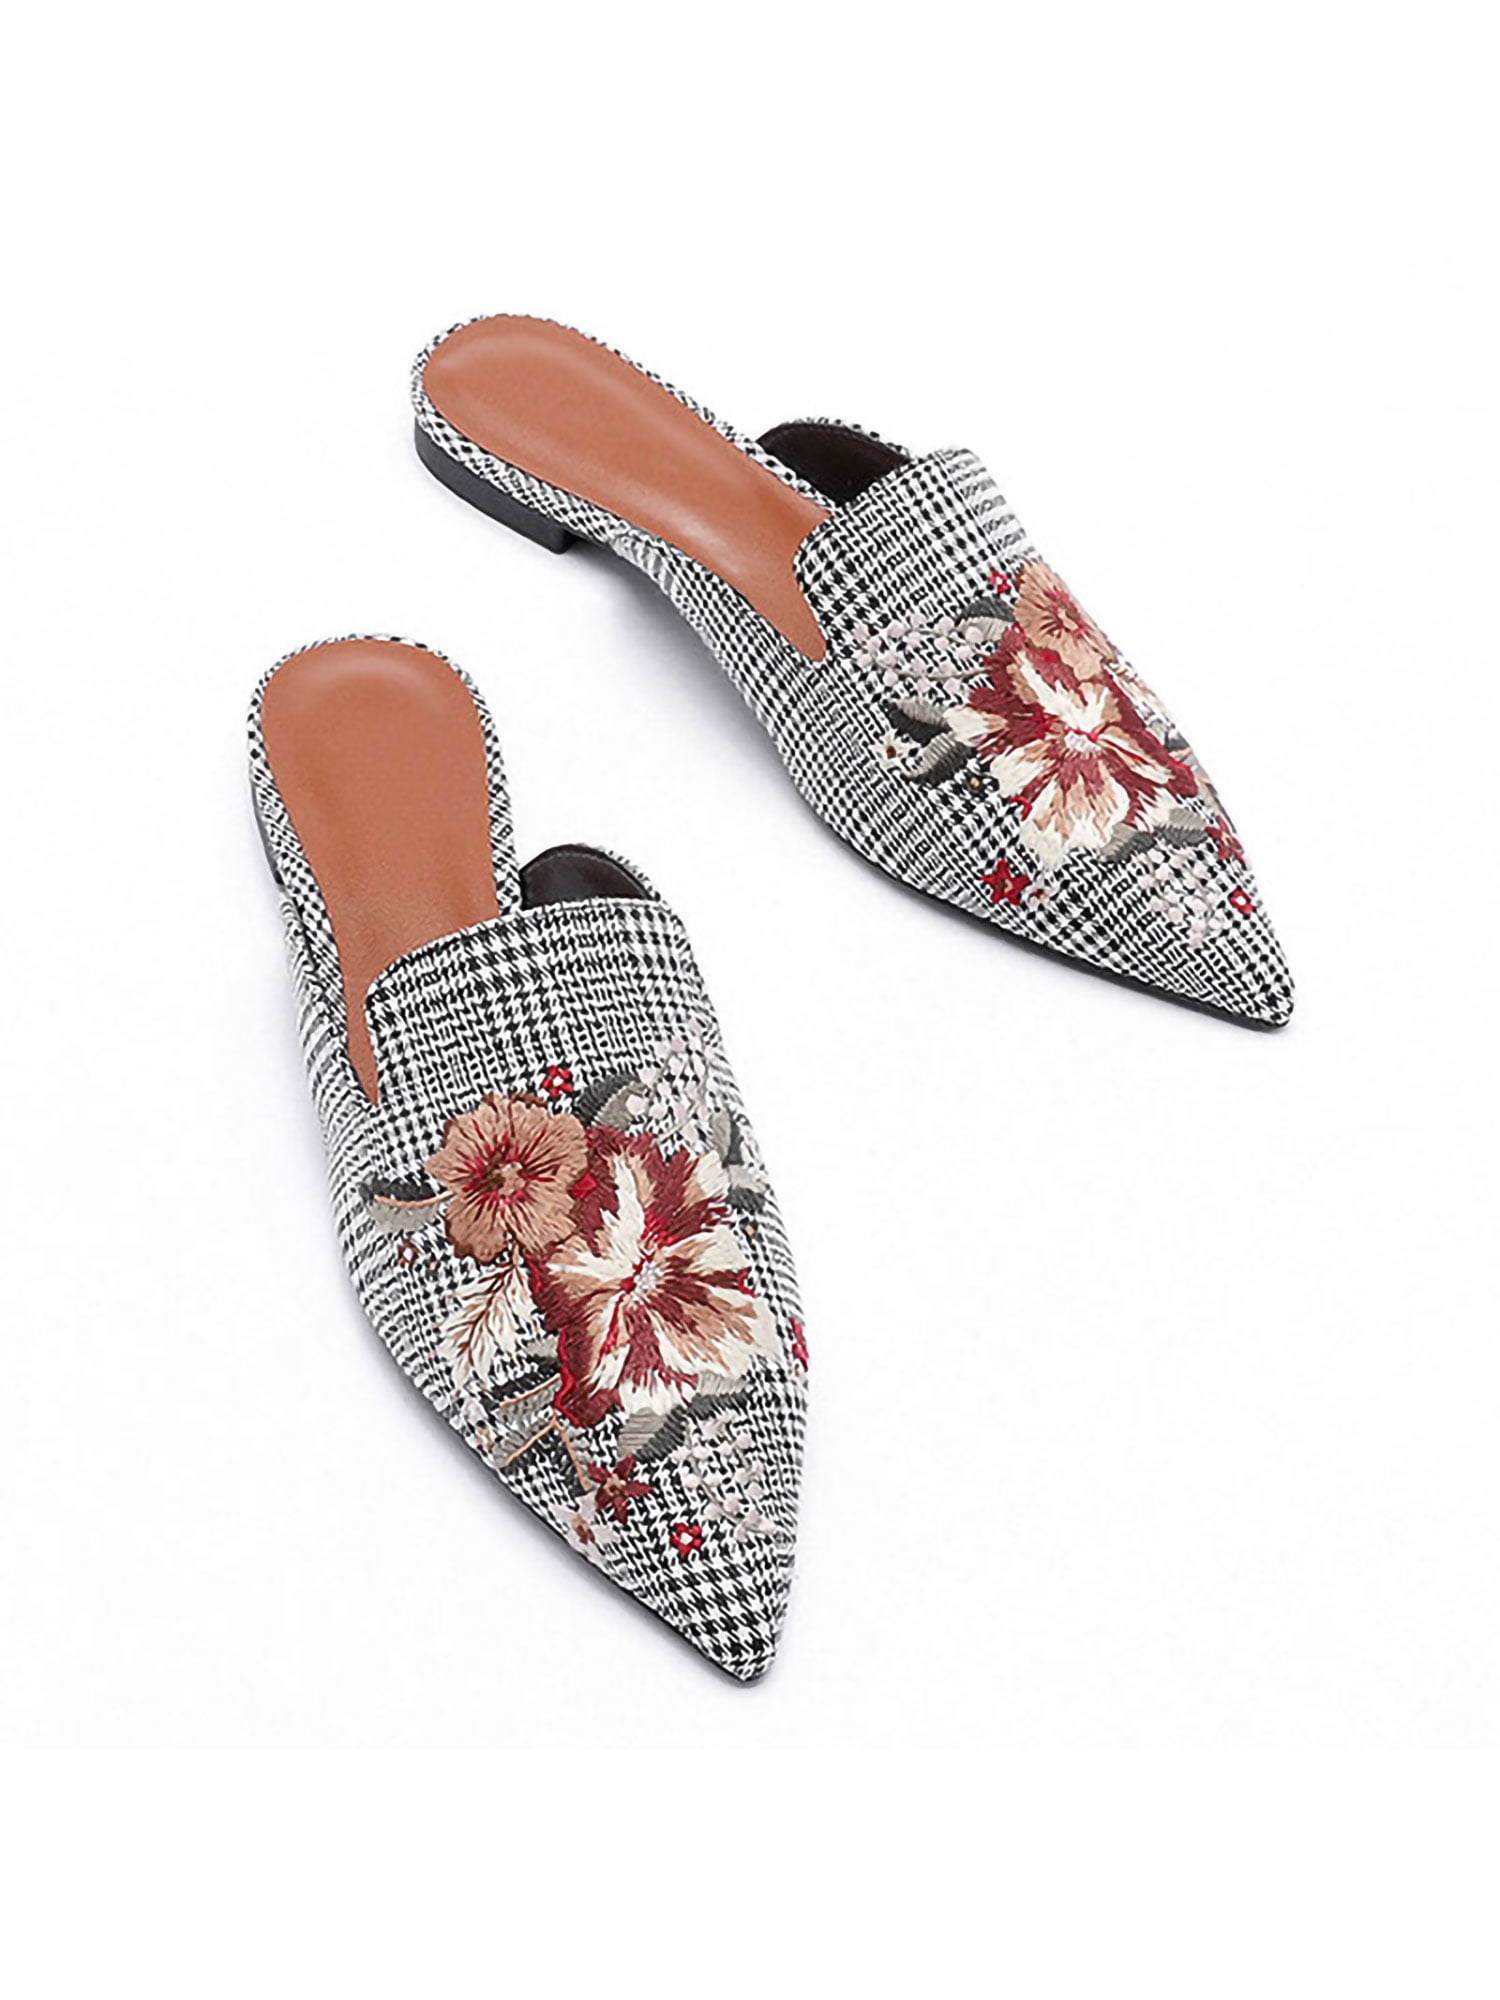 Details about   Women's Flower Embroidery Flat Mules Slippers Vintage Velvet Pointed Toe Shoes